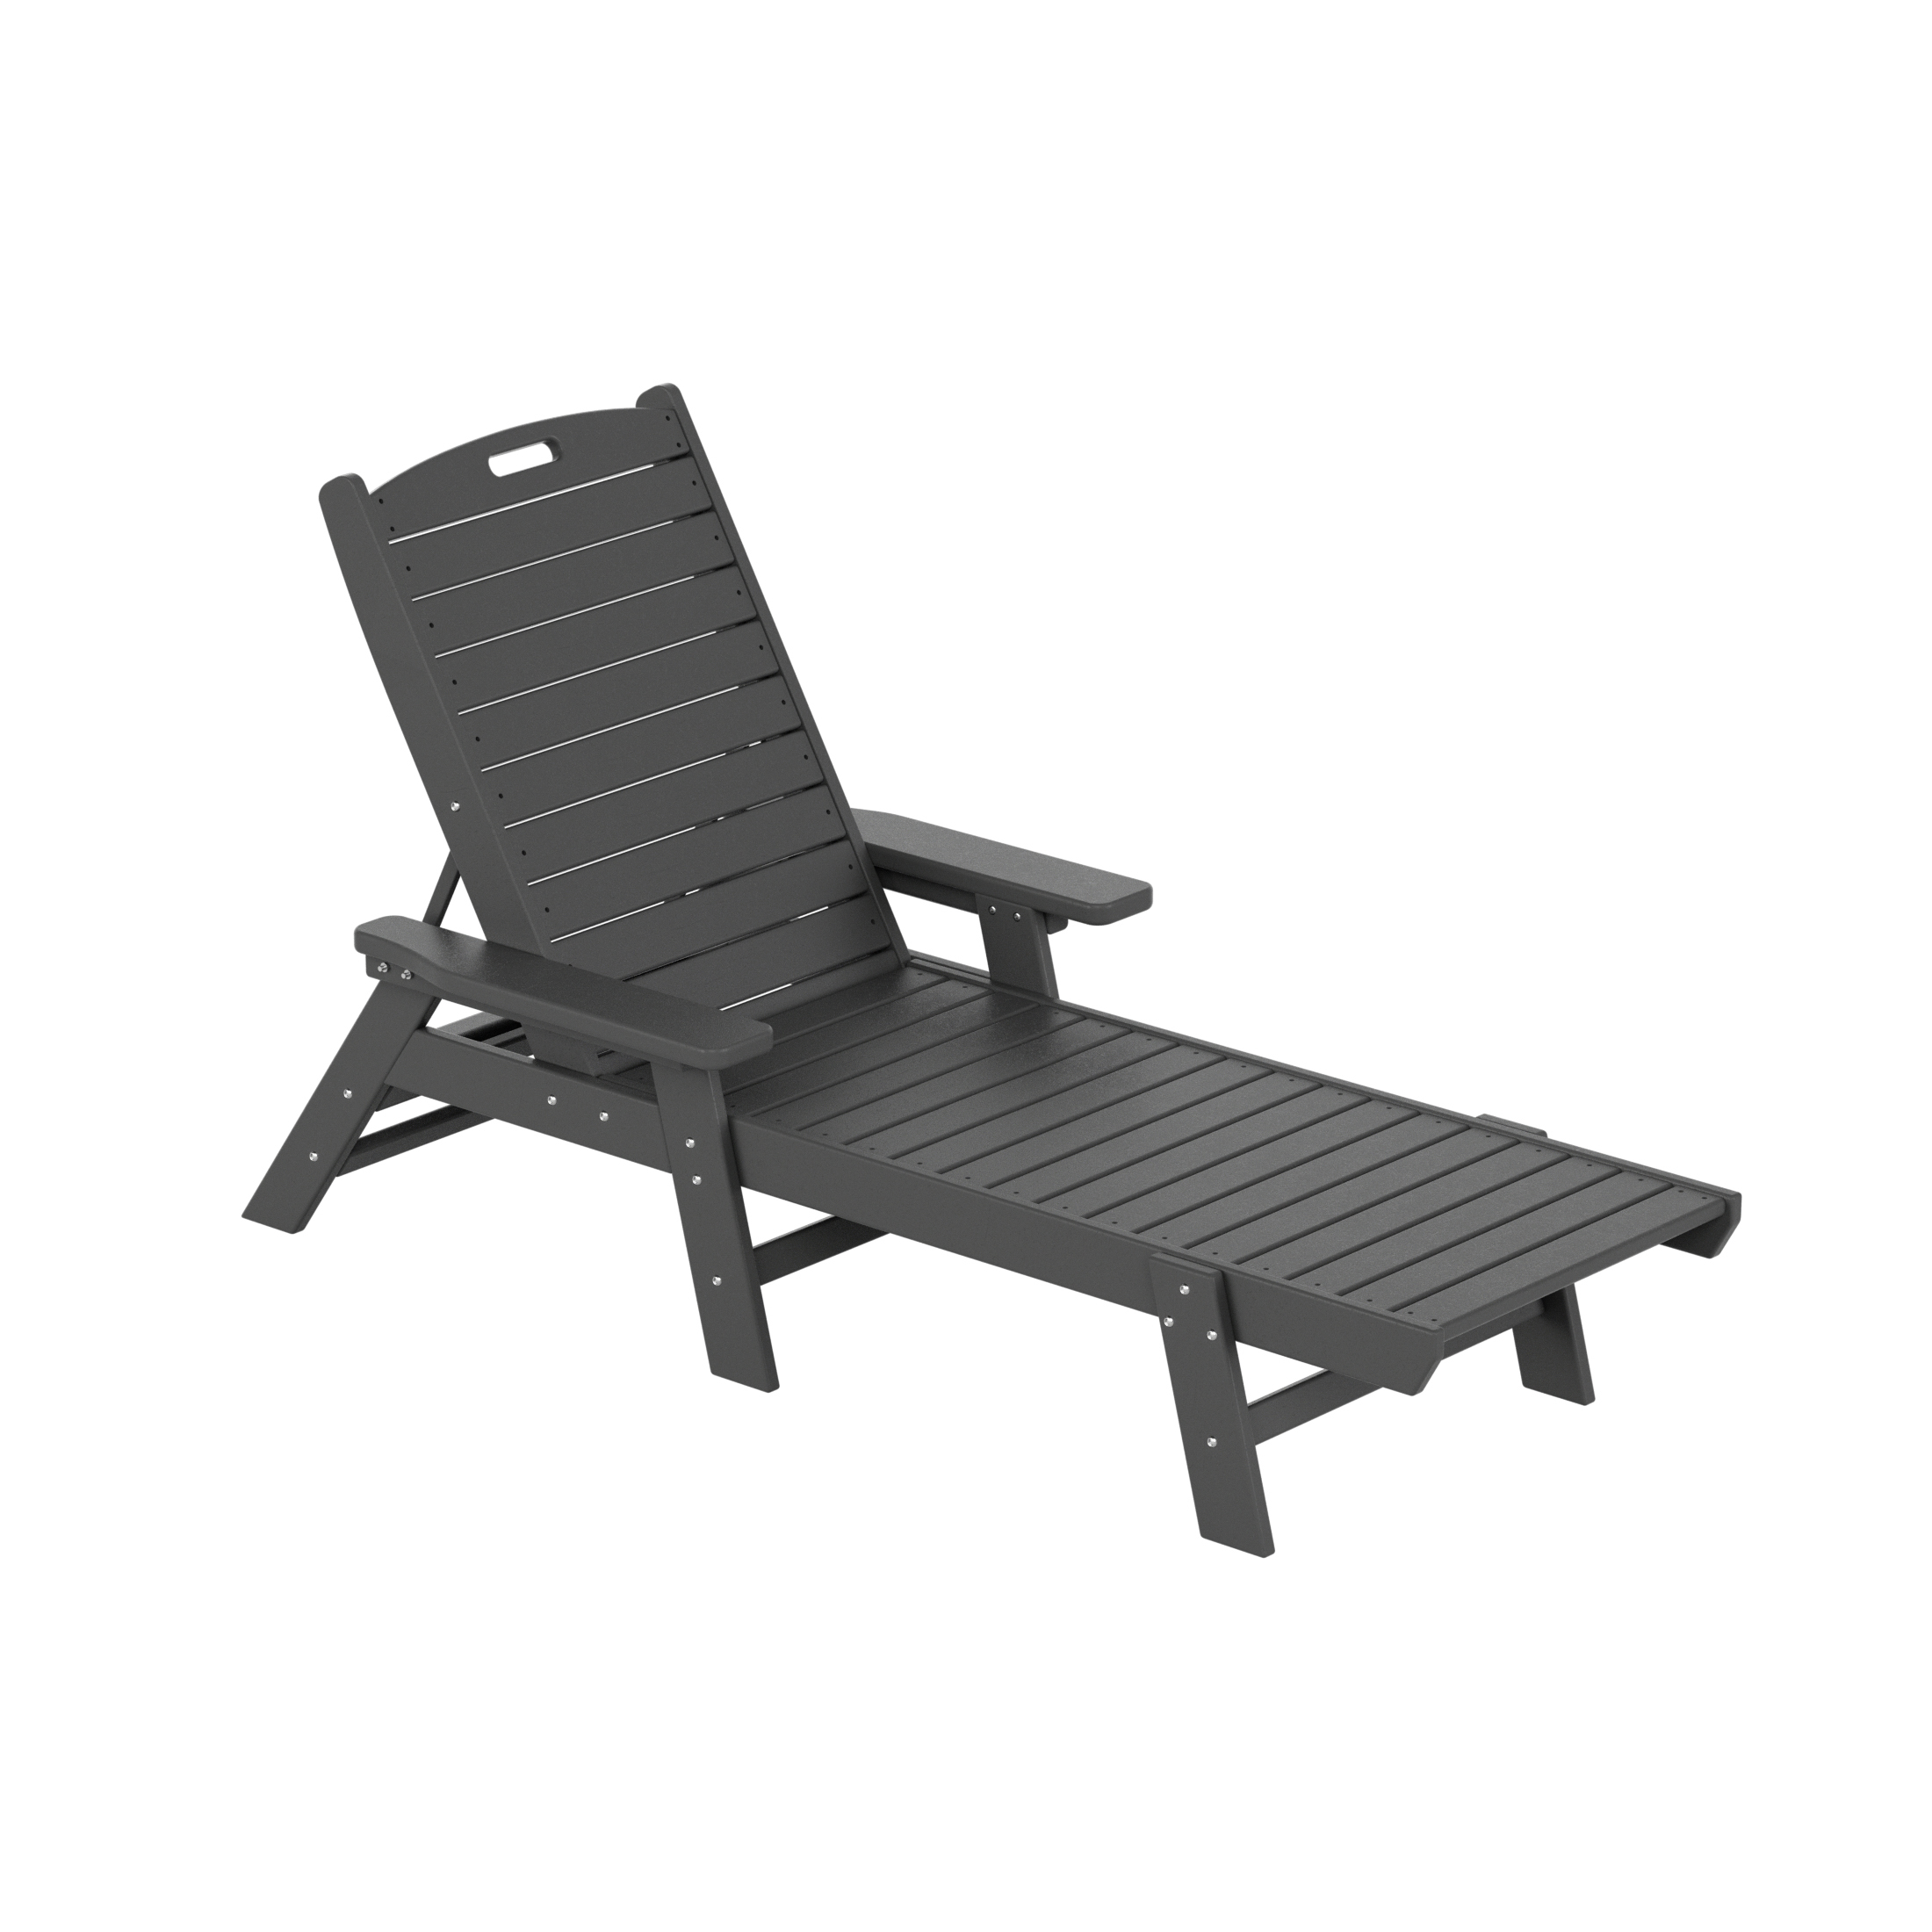 Costaelm Paradise Adirondack Outdoor Chaise Lounge with Arm (Set of 2), Gray - image 3 of 8